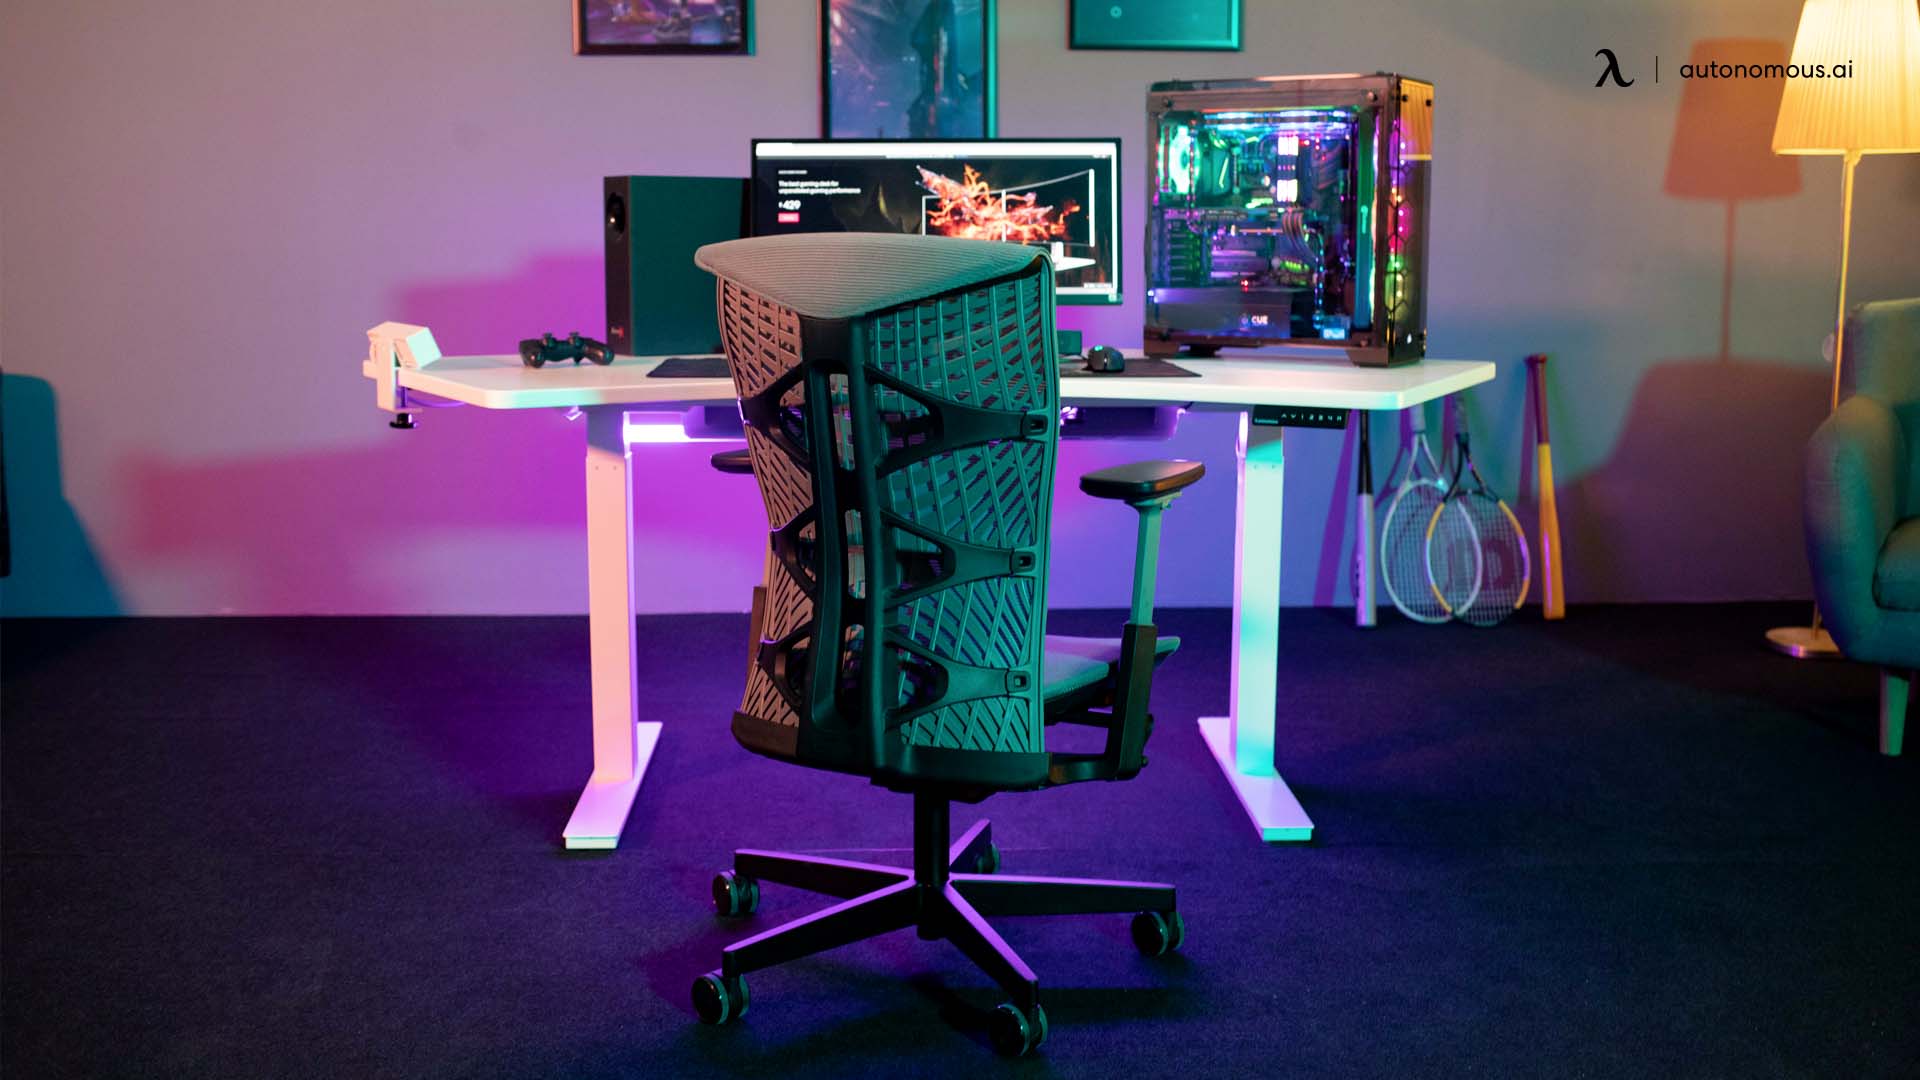 How Does the Desk Work?